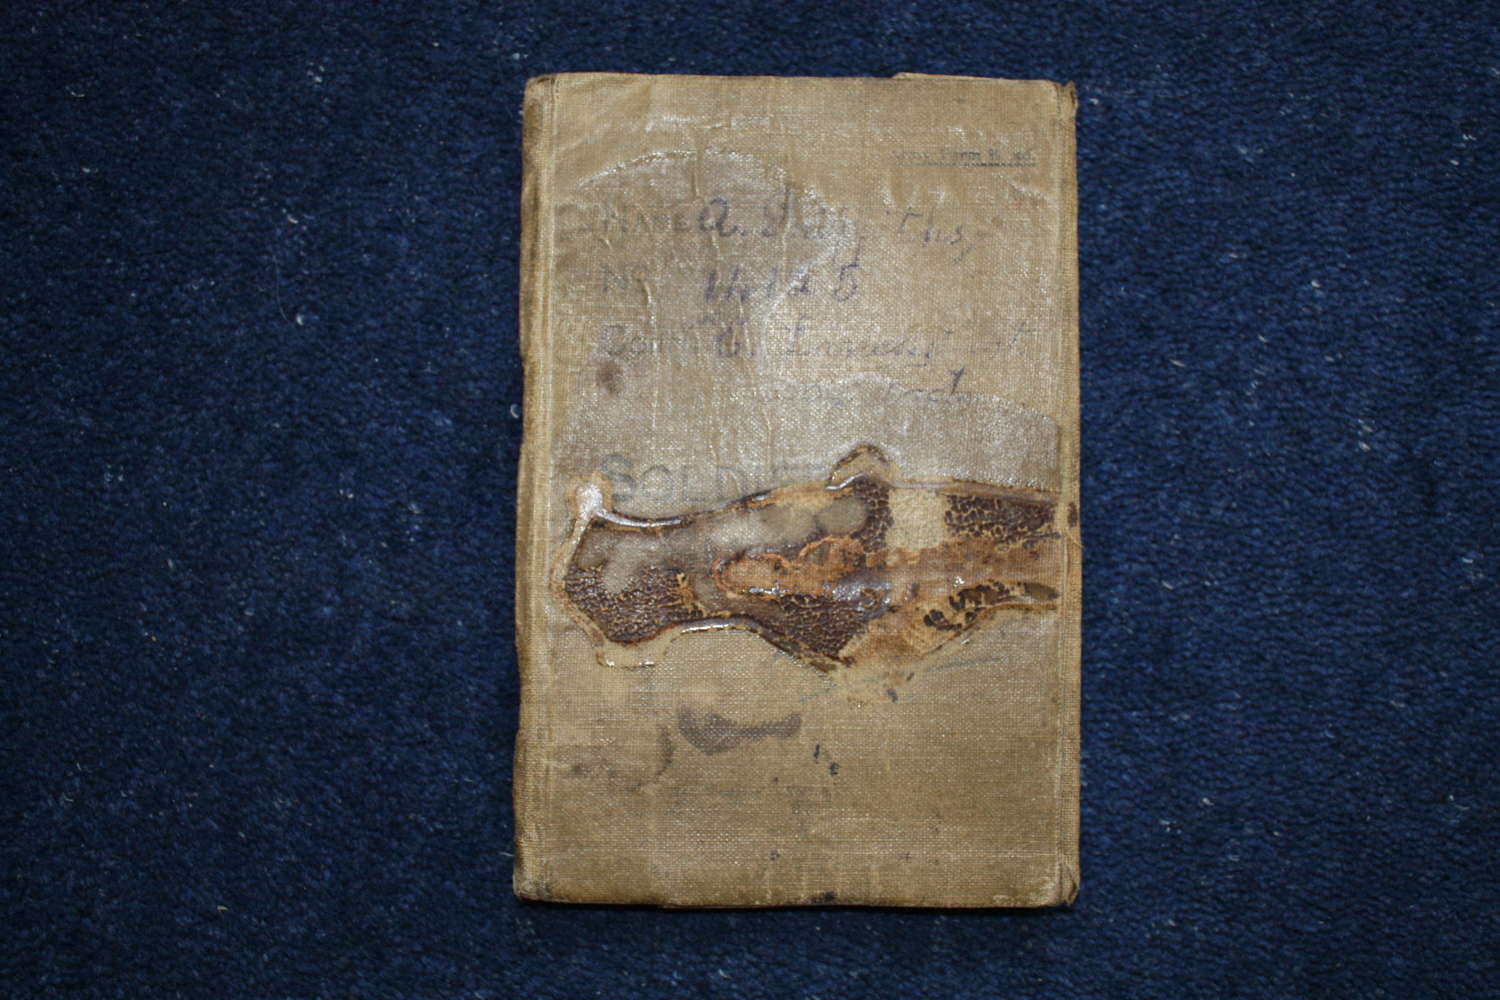 WW1 BRITISH ARMY SOLDIERS SMALL BOOK ARTHUR GRIFFITHS EAST LANCS